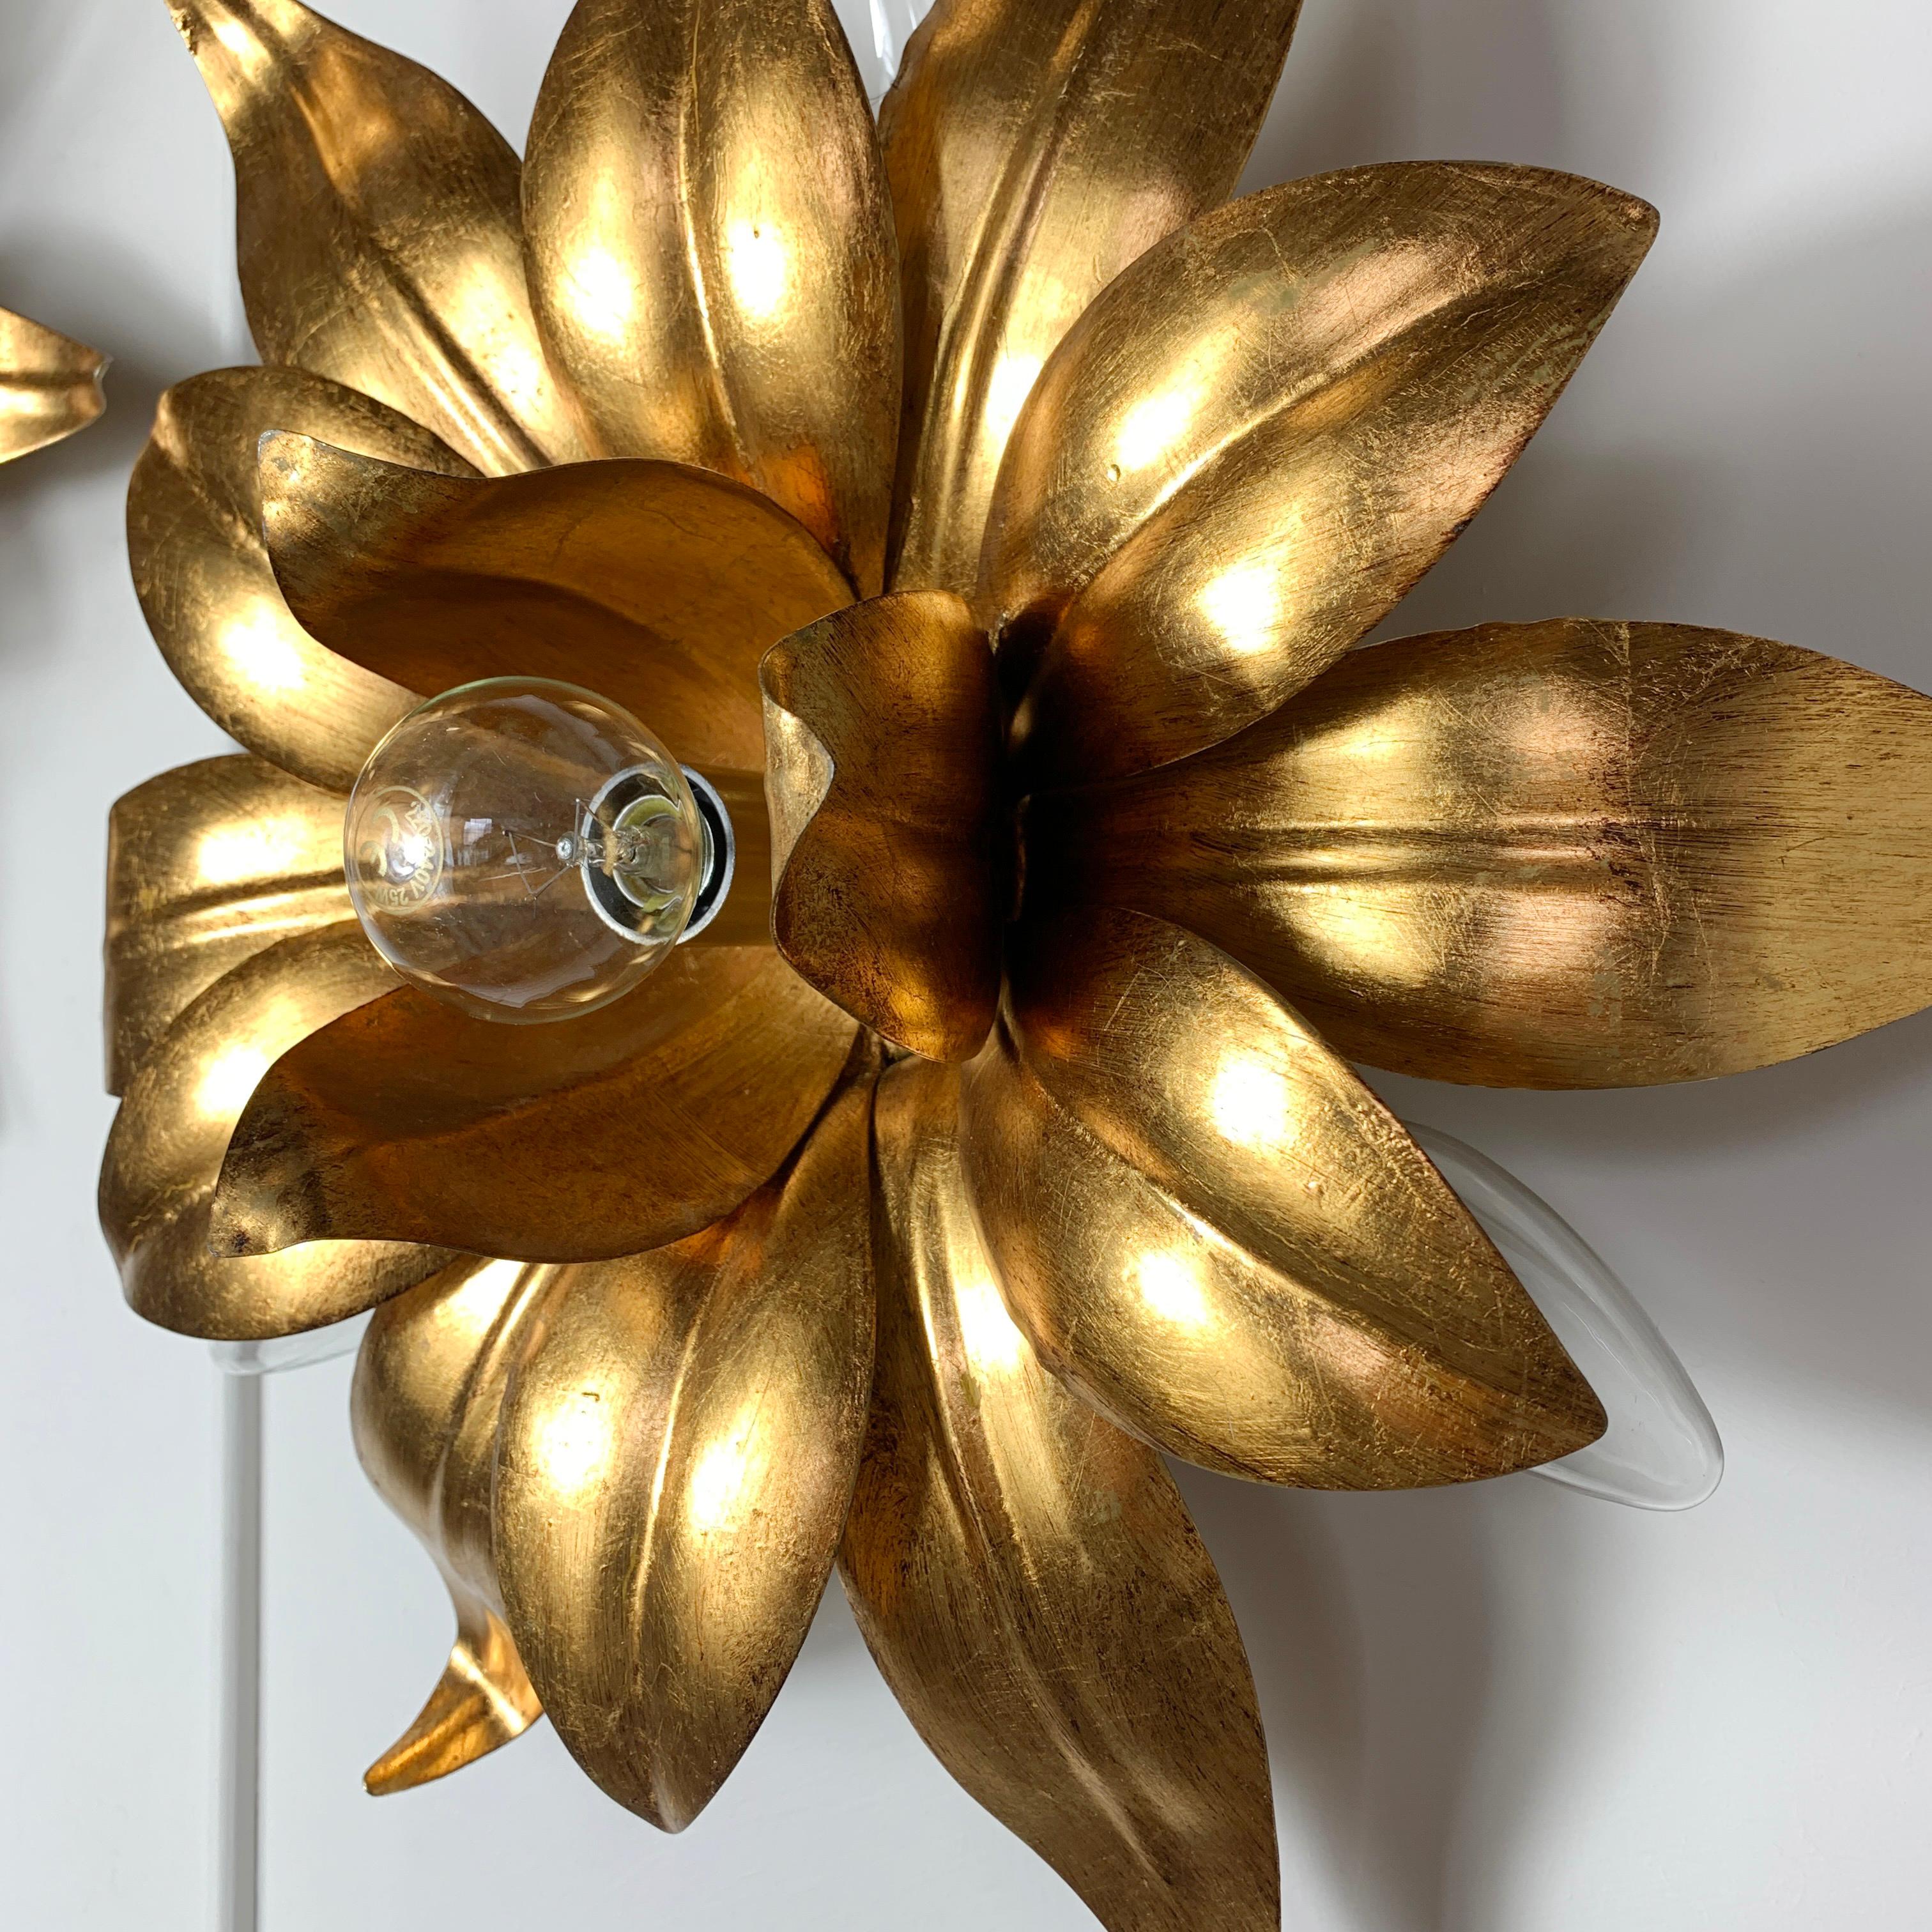 A beautiful pair of Italian gilt flower wall lights, very much in the Kogl style, and dating from the 1970's. Each light has 4 lamp holders, one in the centre of the flower and three additional bulbs that sit underneath the individual petals. The